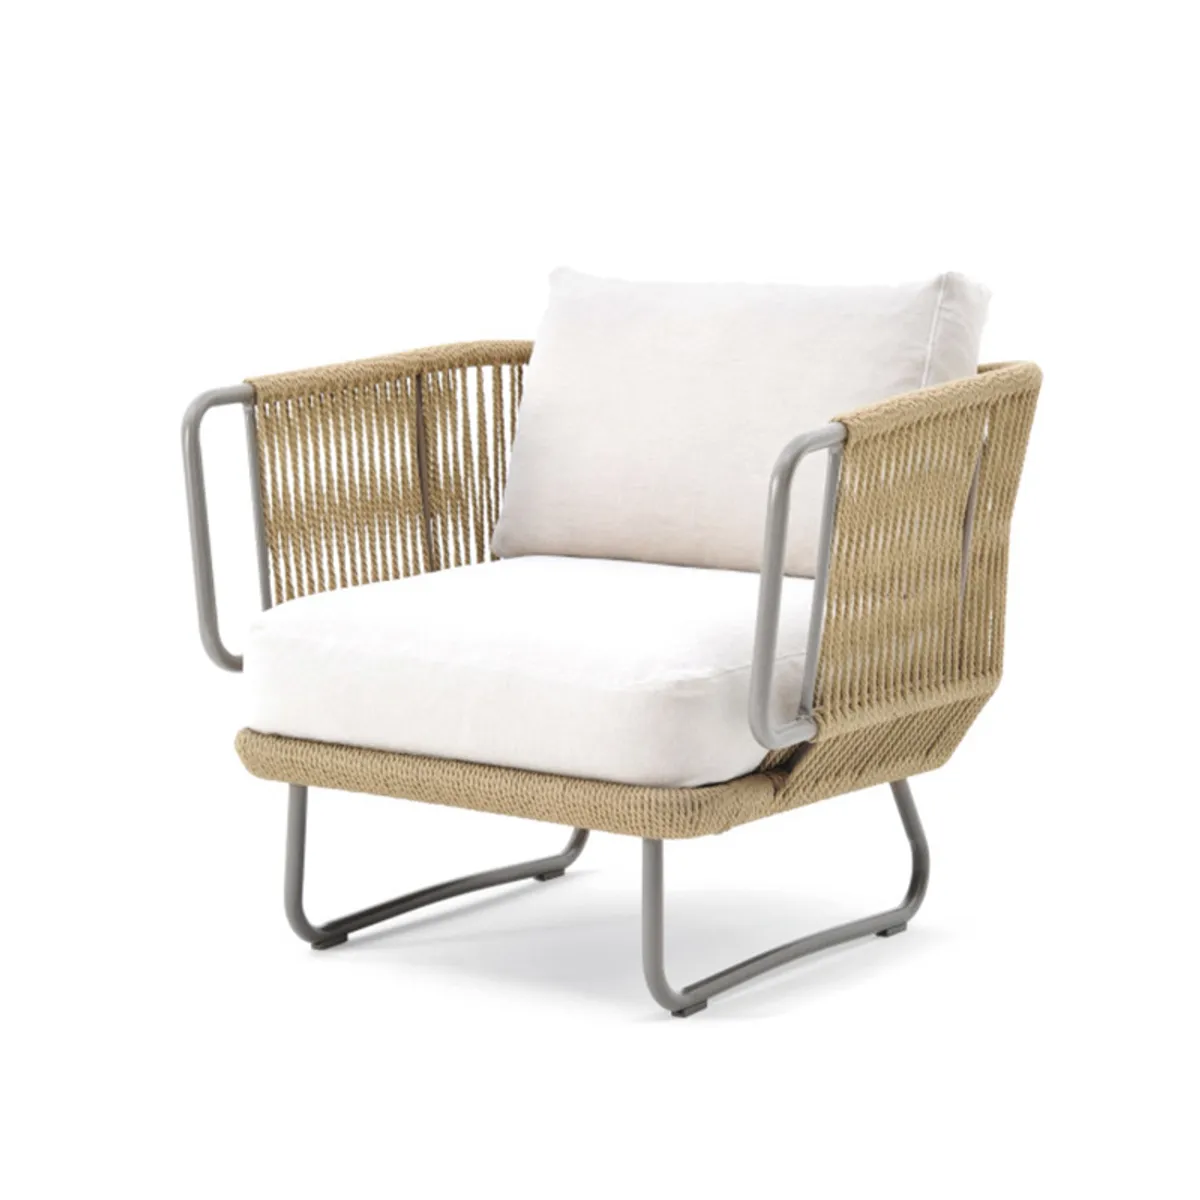 Babylon Lounge Chair Outdoor Lounge Furniture For Poolside Cafes And Hotel Terraaces Detail Insideoutcontracts 031